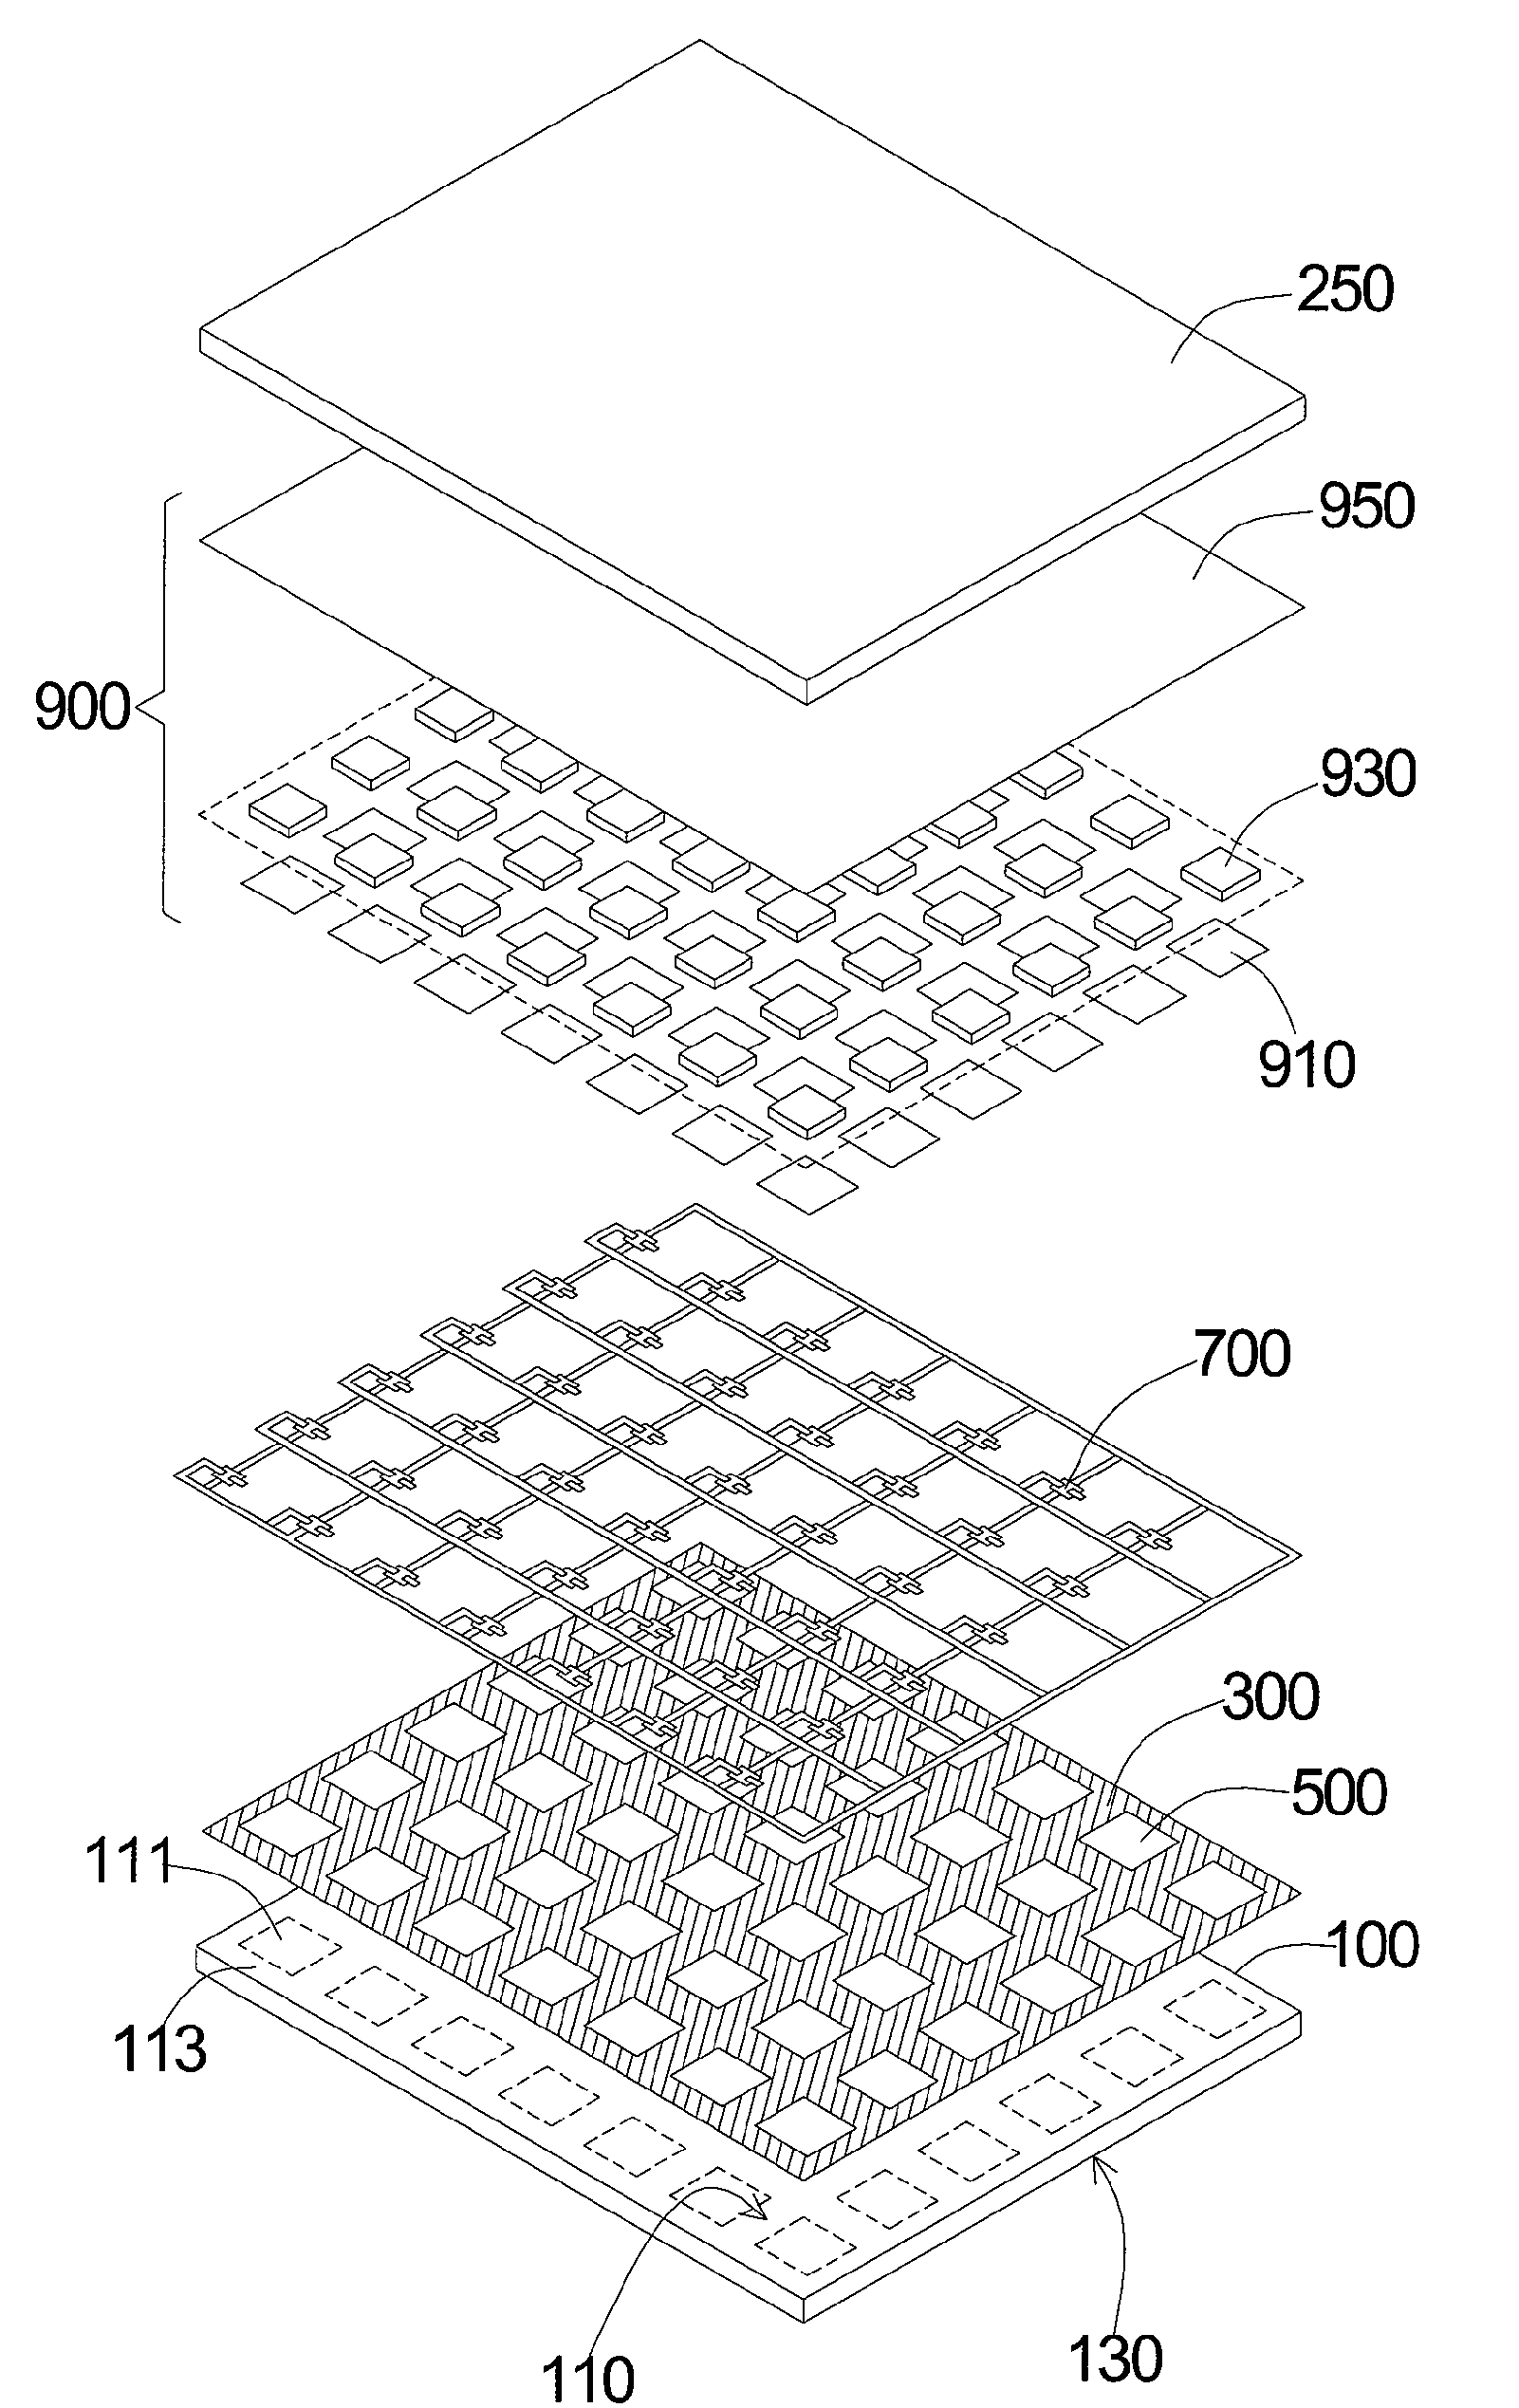 Pixel Unit Structure of Self-Illumination Display with Low-Reflection